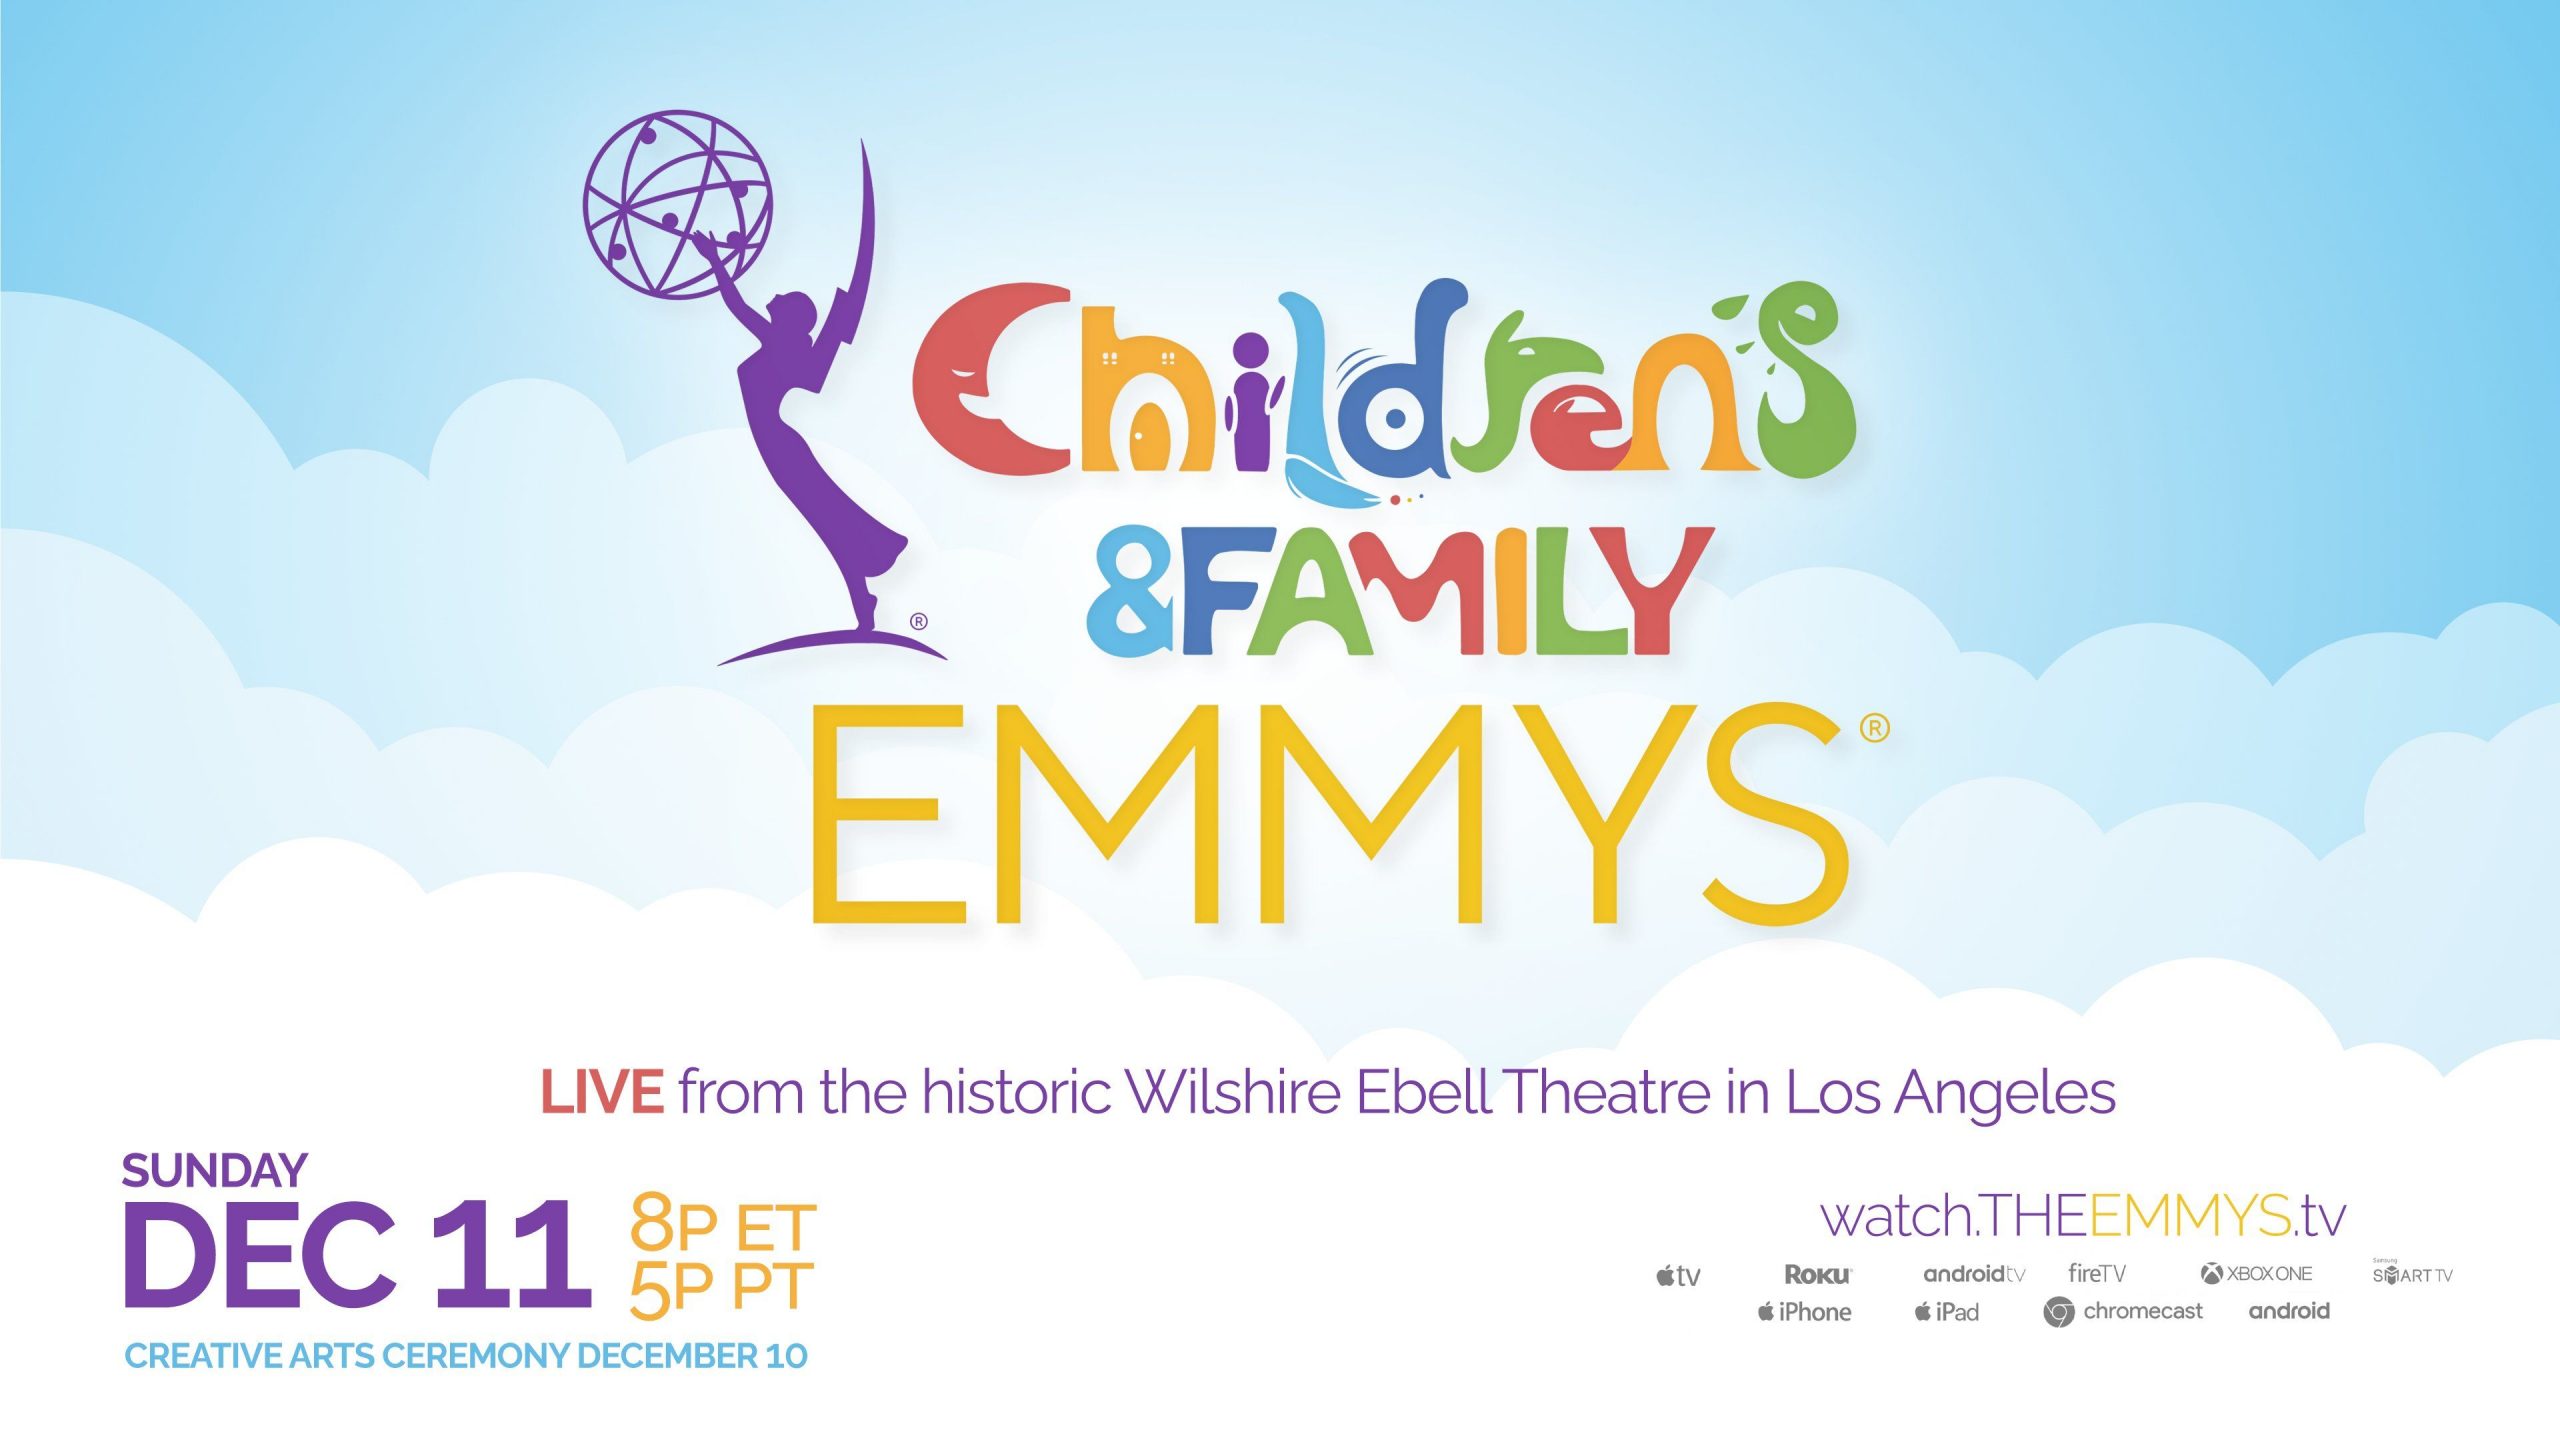 What are the Children’s and Family Emmy Awards?